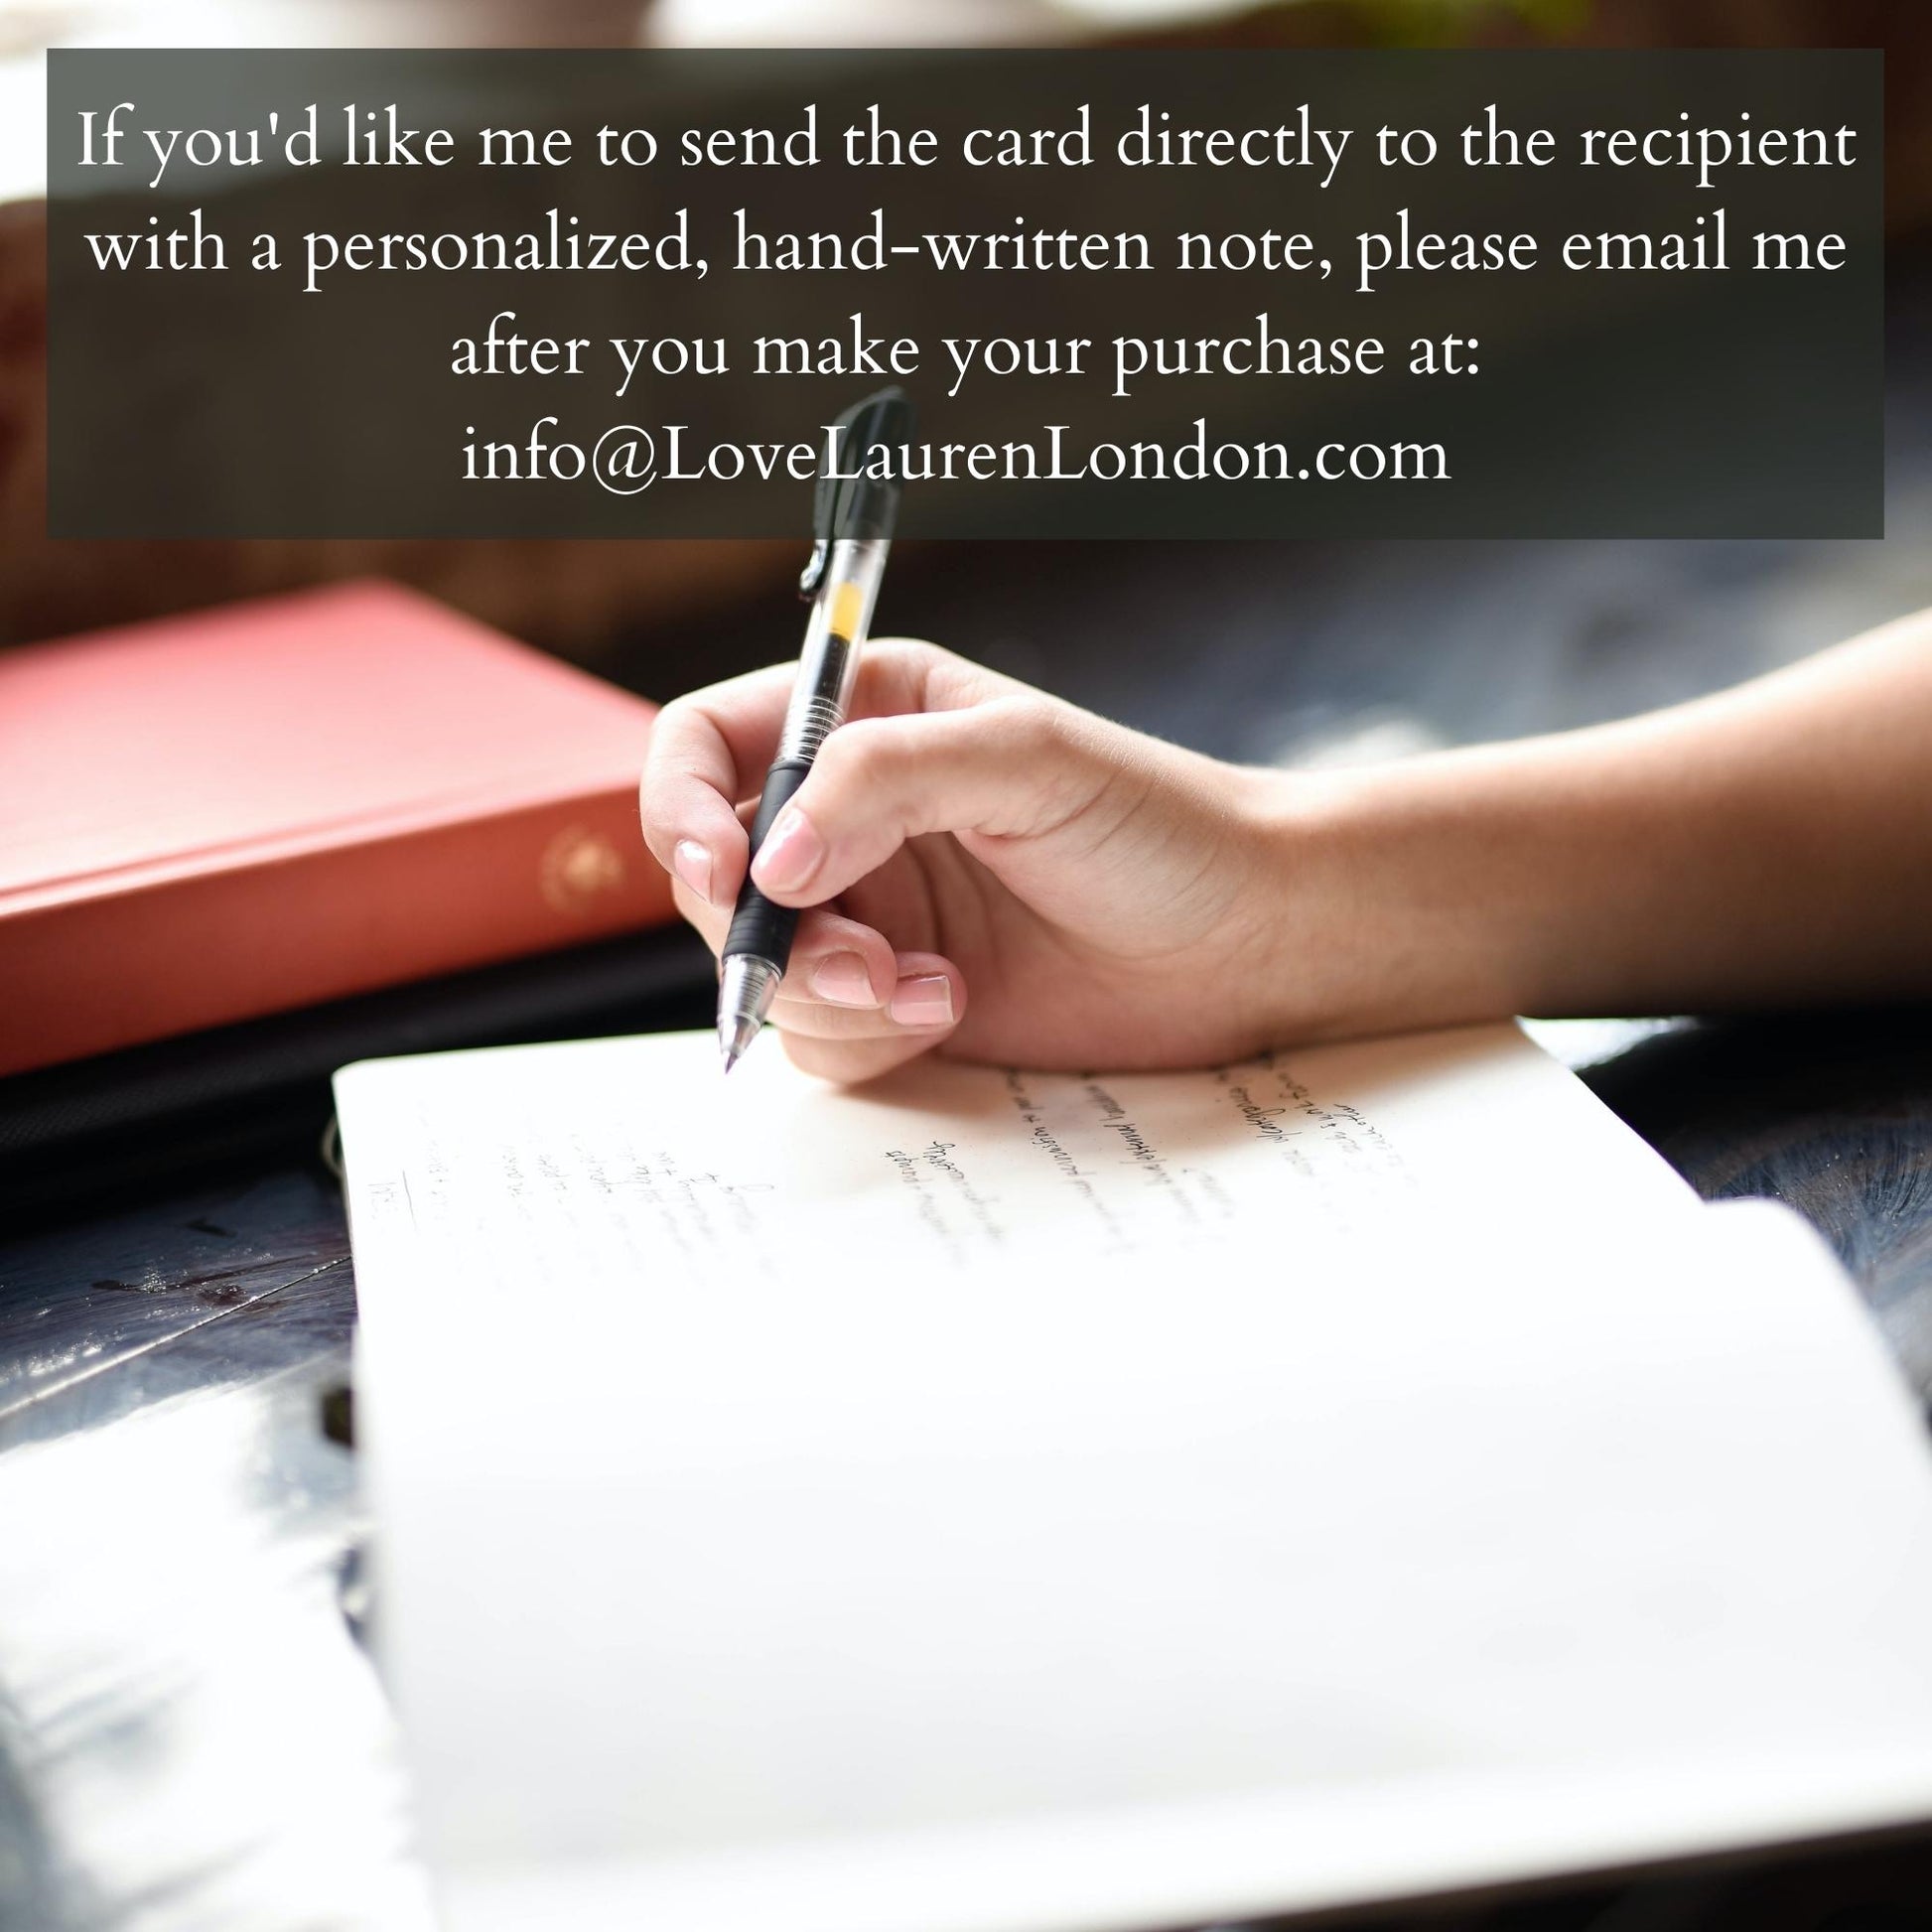 if you'd like me to send the card directly to the recipient with a personalized, hand-written note, please email me after your purchase. There is no fee for this add-on feature